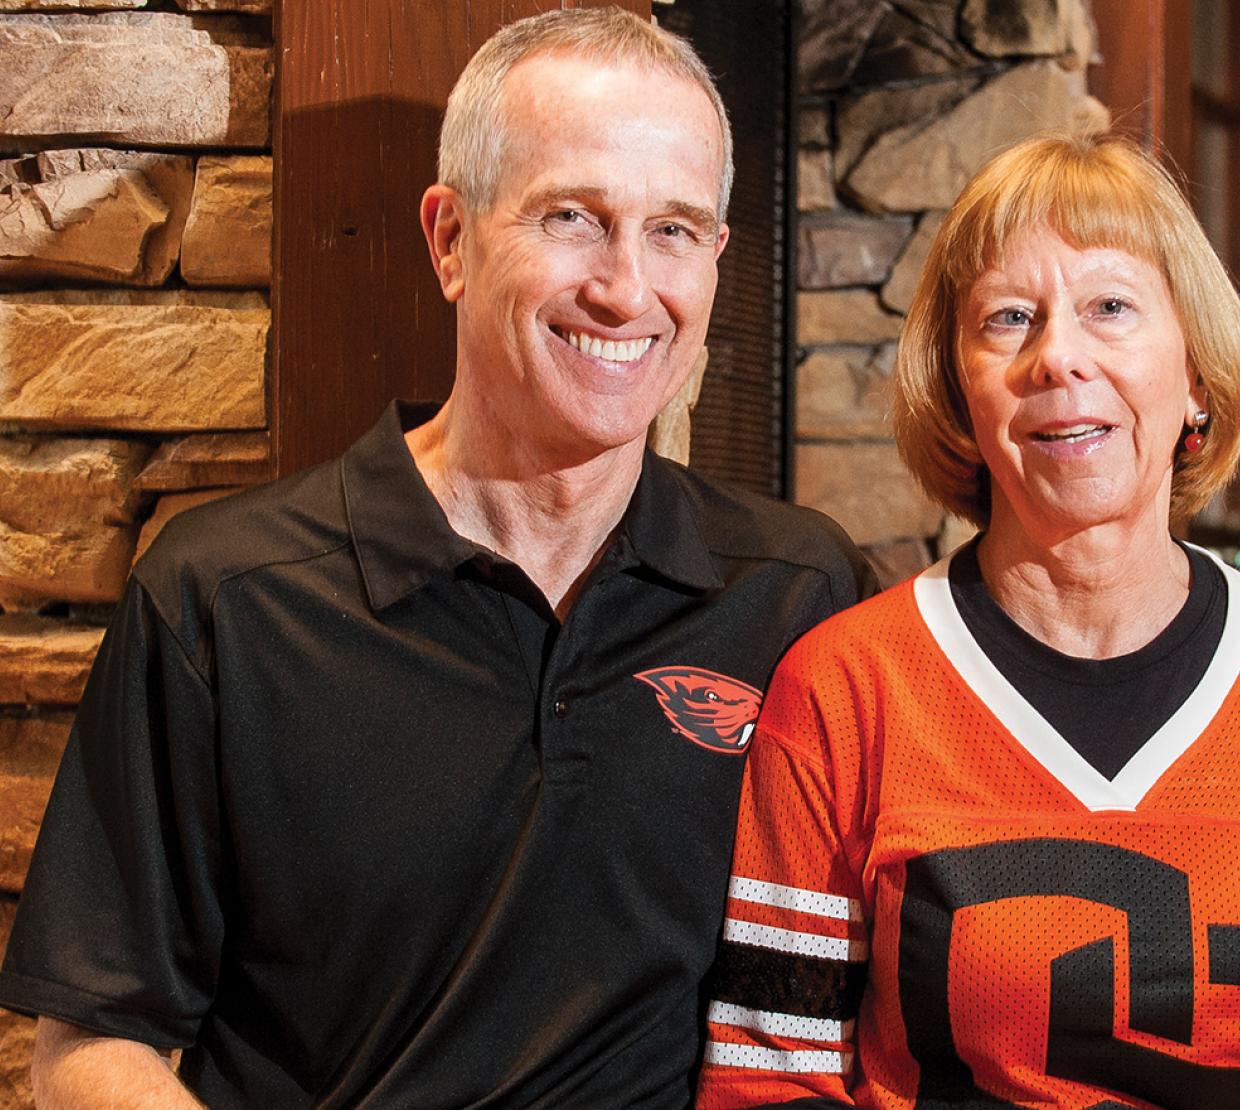 Bernard and Suzanne McGrath sit together in a home wearing Oregon State attire.